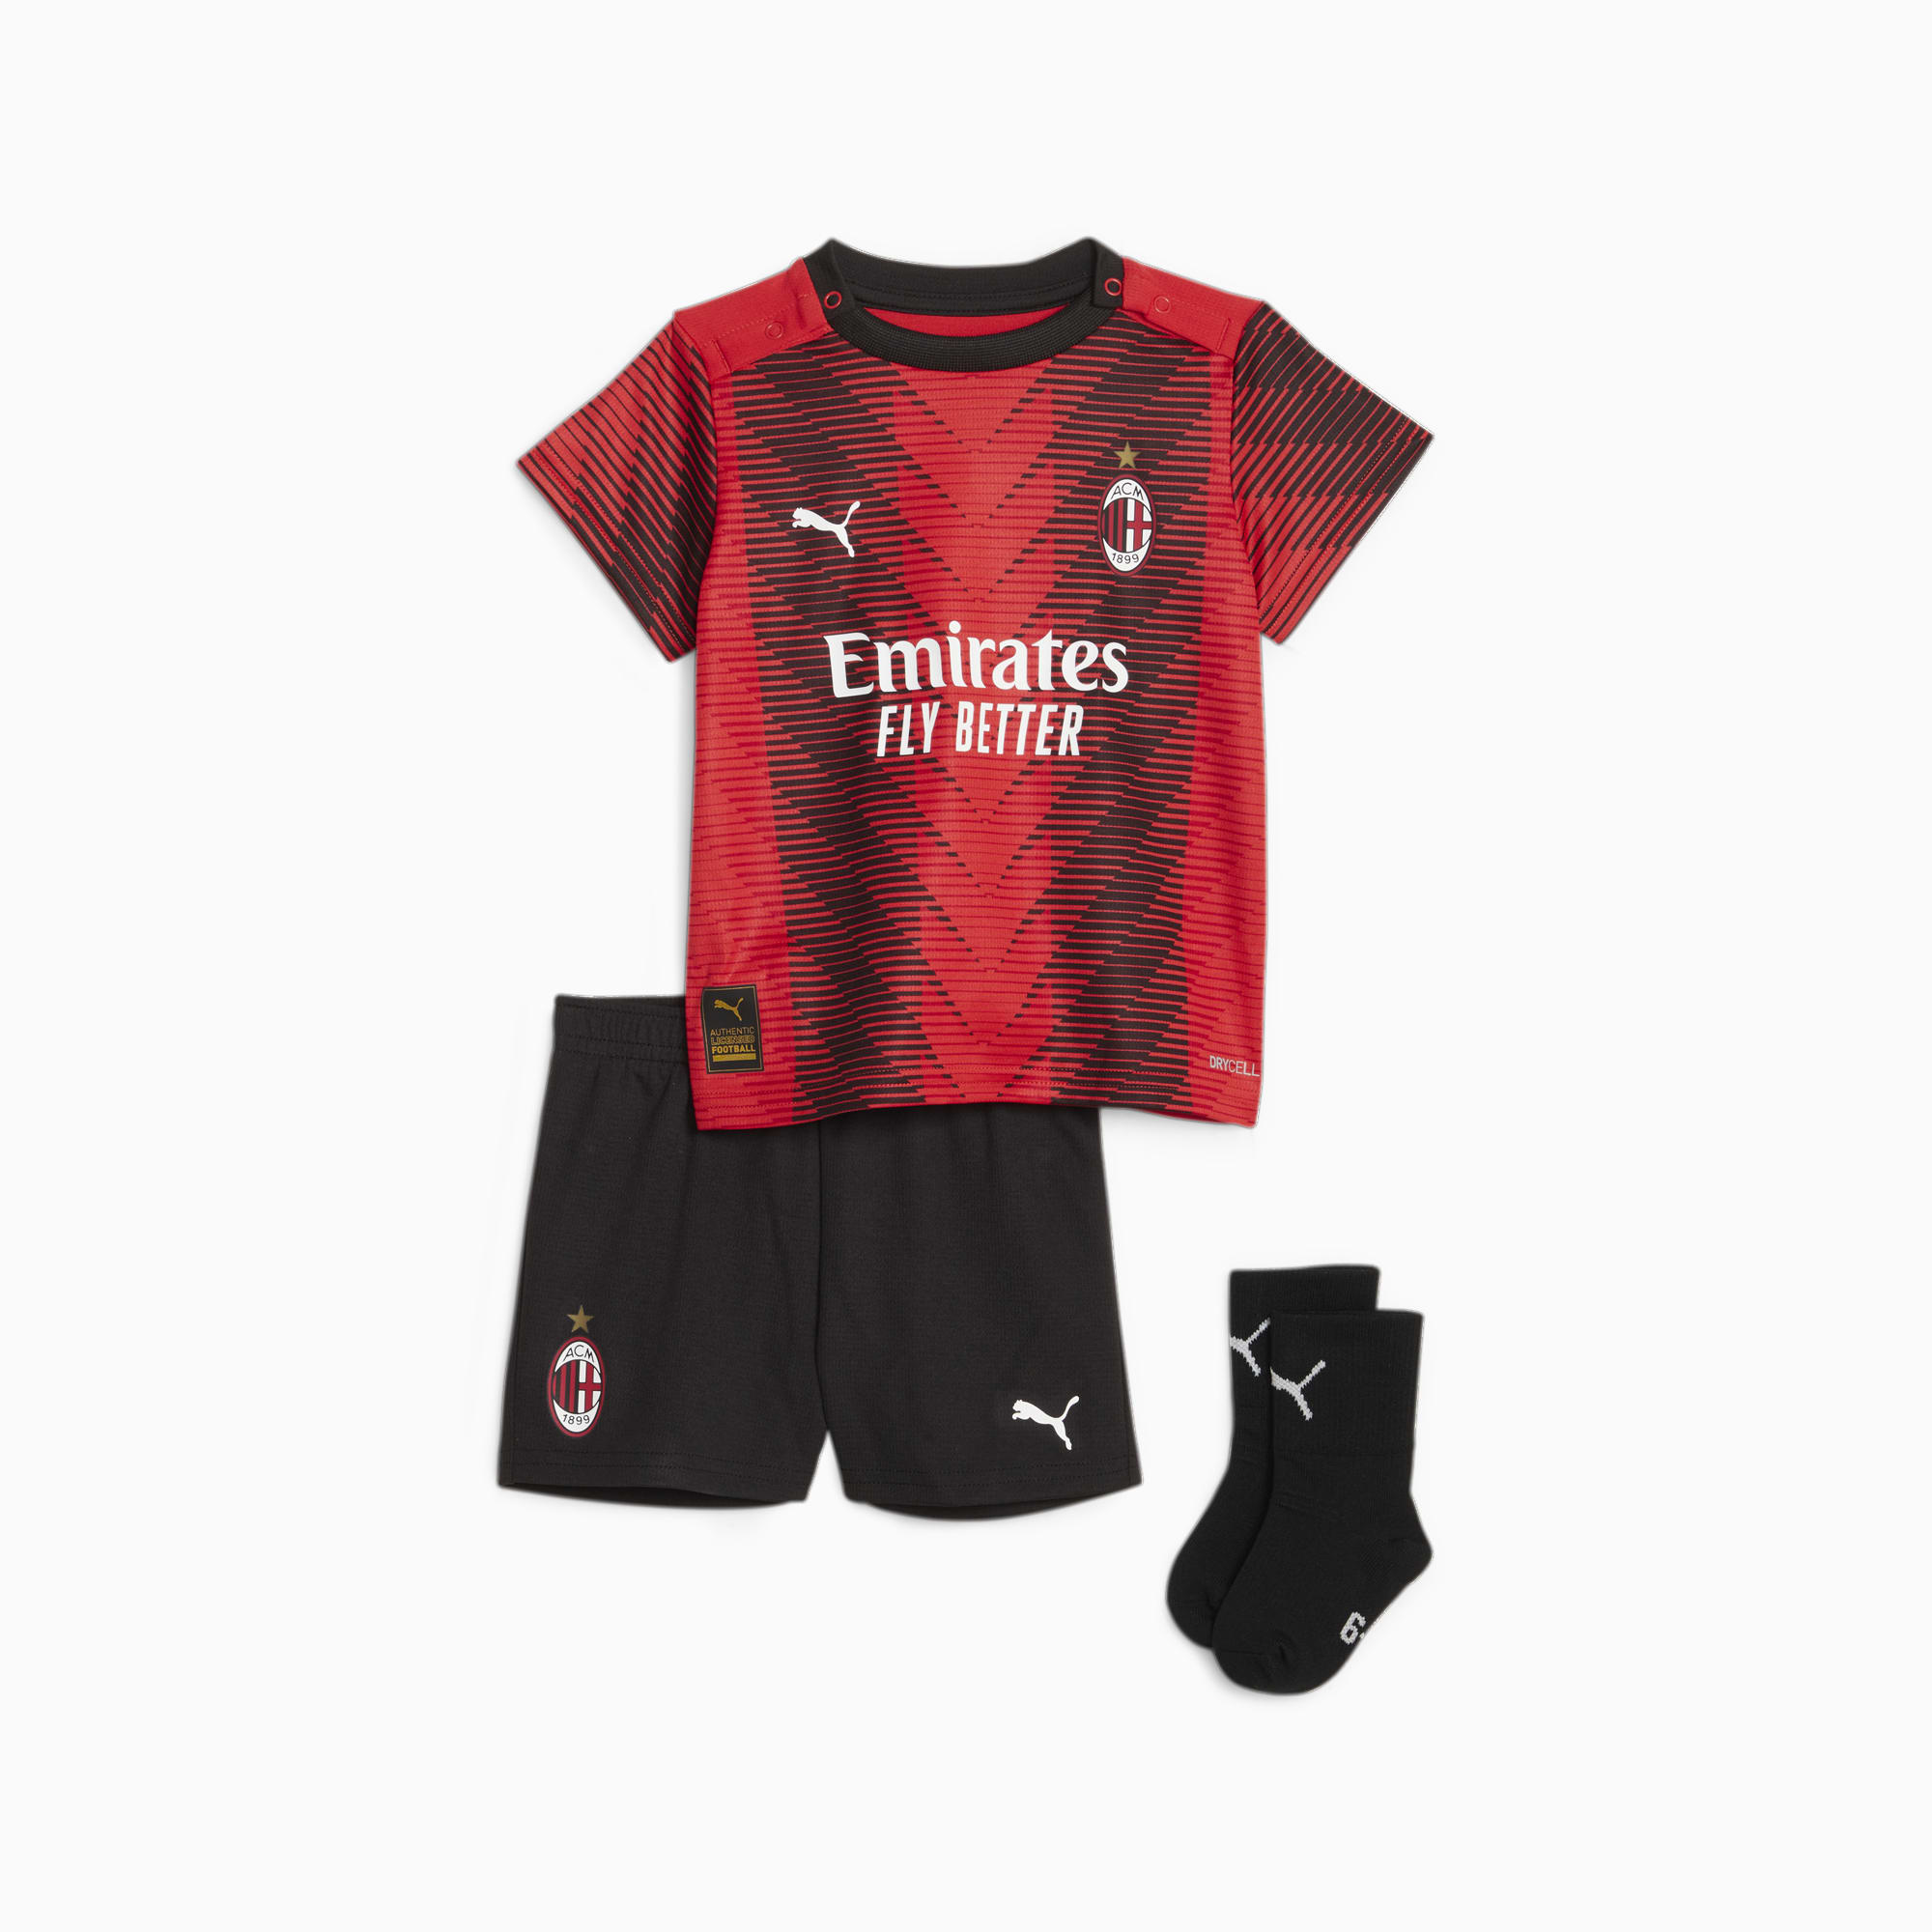 PUMA A.C. Milan 23/24 Home Baby Kit, For All Time Red/Black, Size 86, Clothing